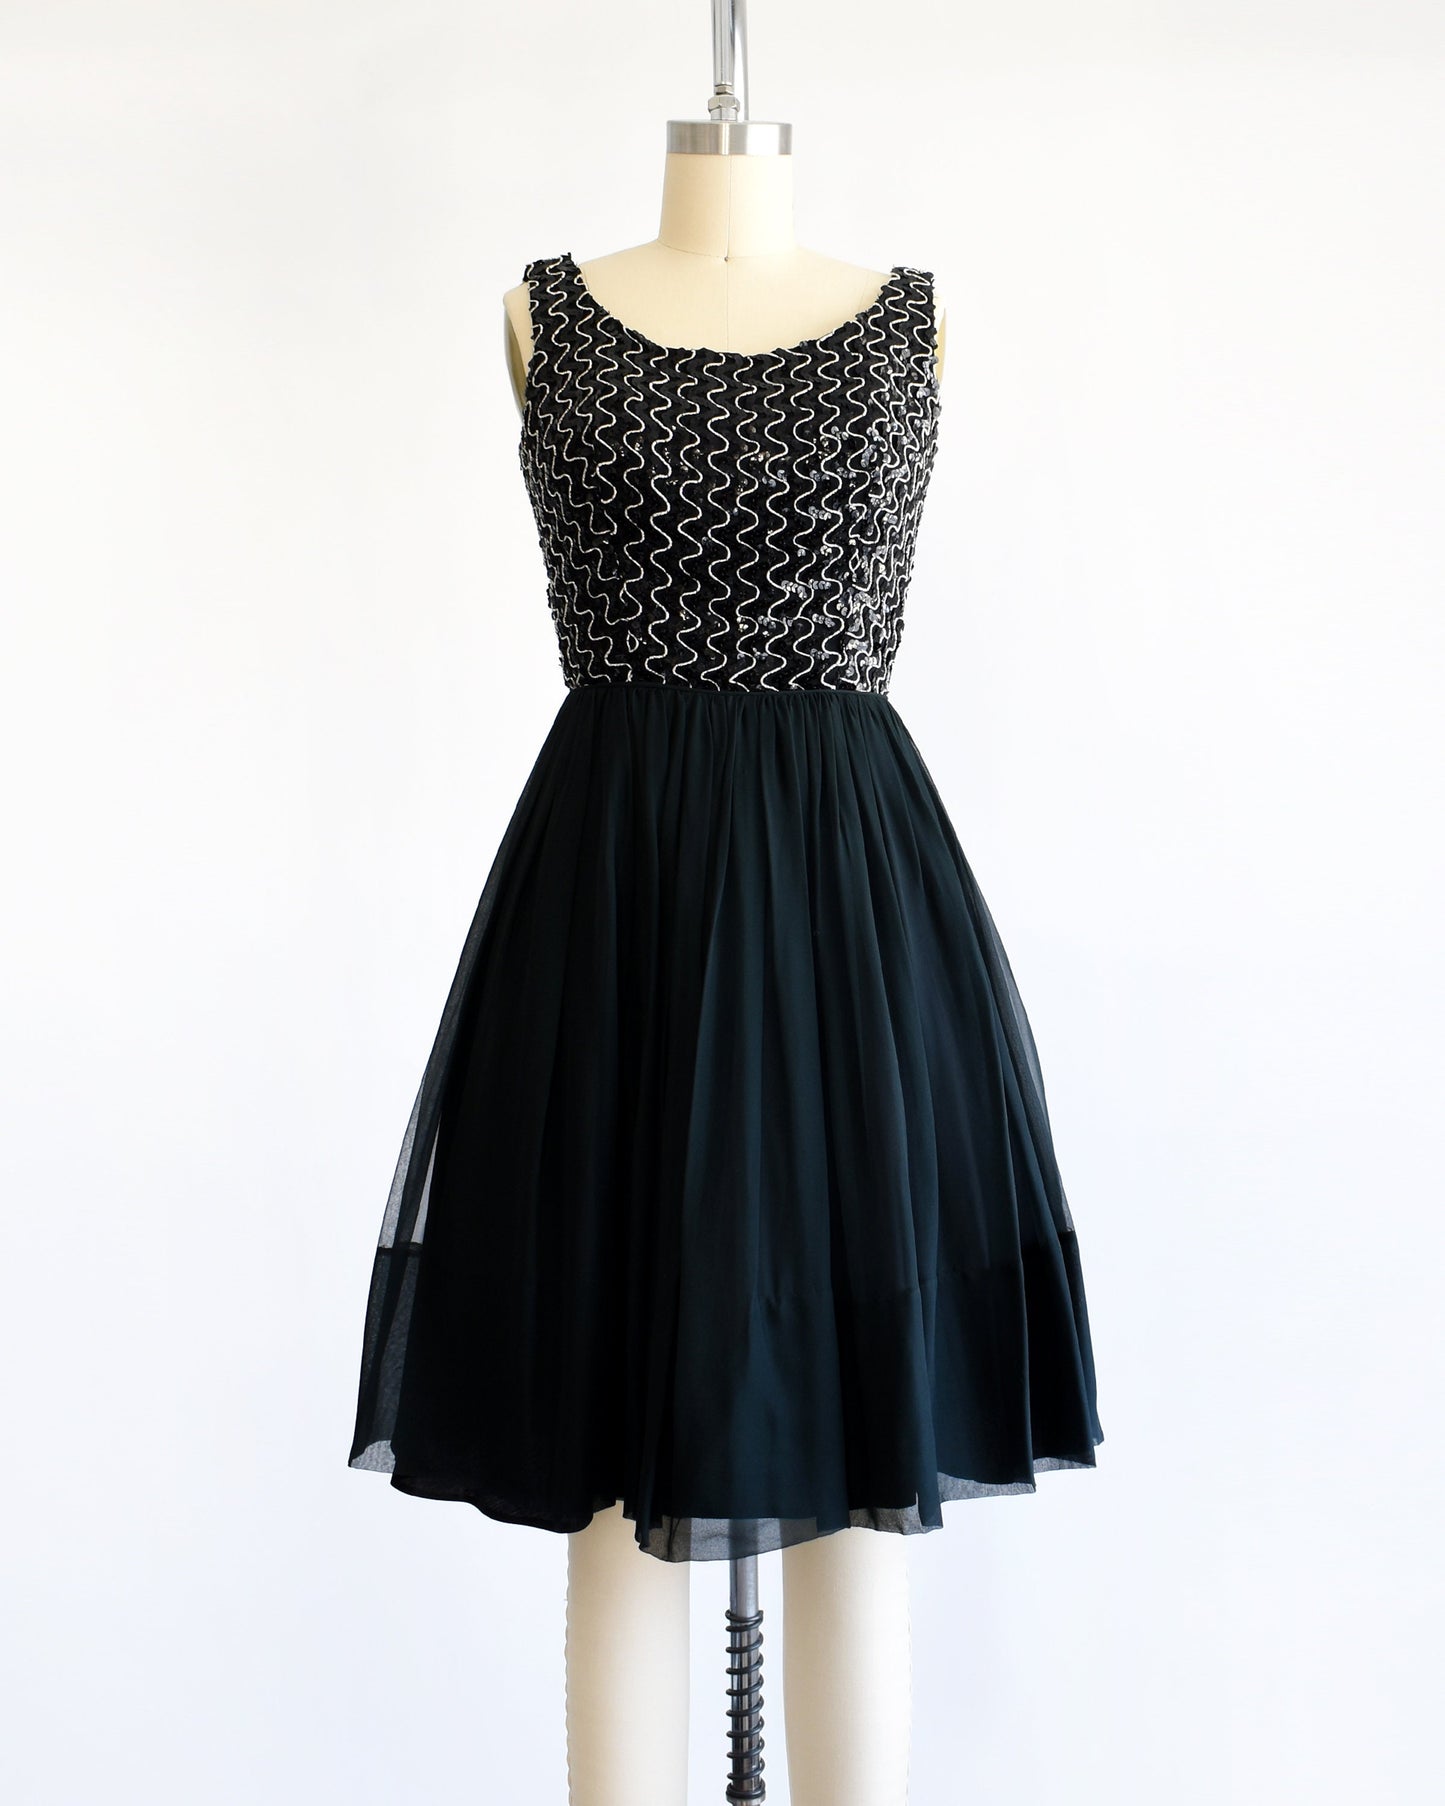 A vintage 60s dress with a black sequin bodice with silver vertical squiggles. The skirt is a layered with black chiffon on top. The dress is modeled on a dress form.